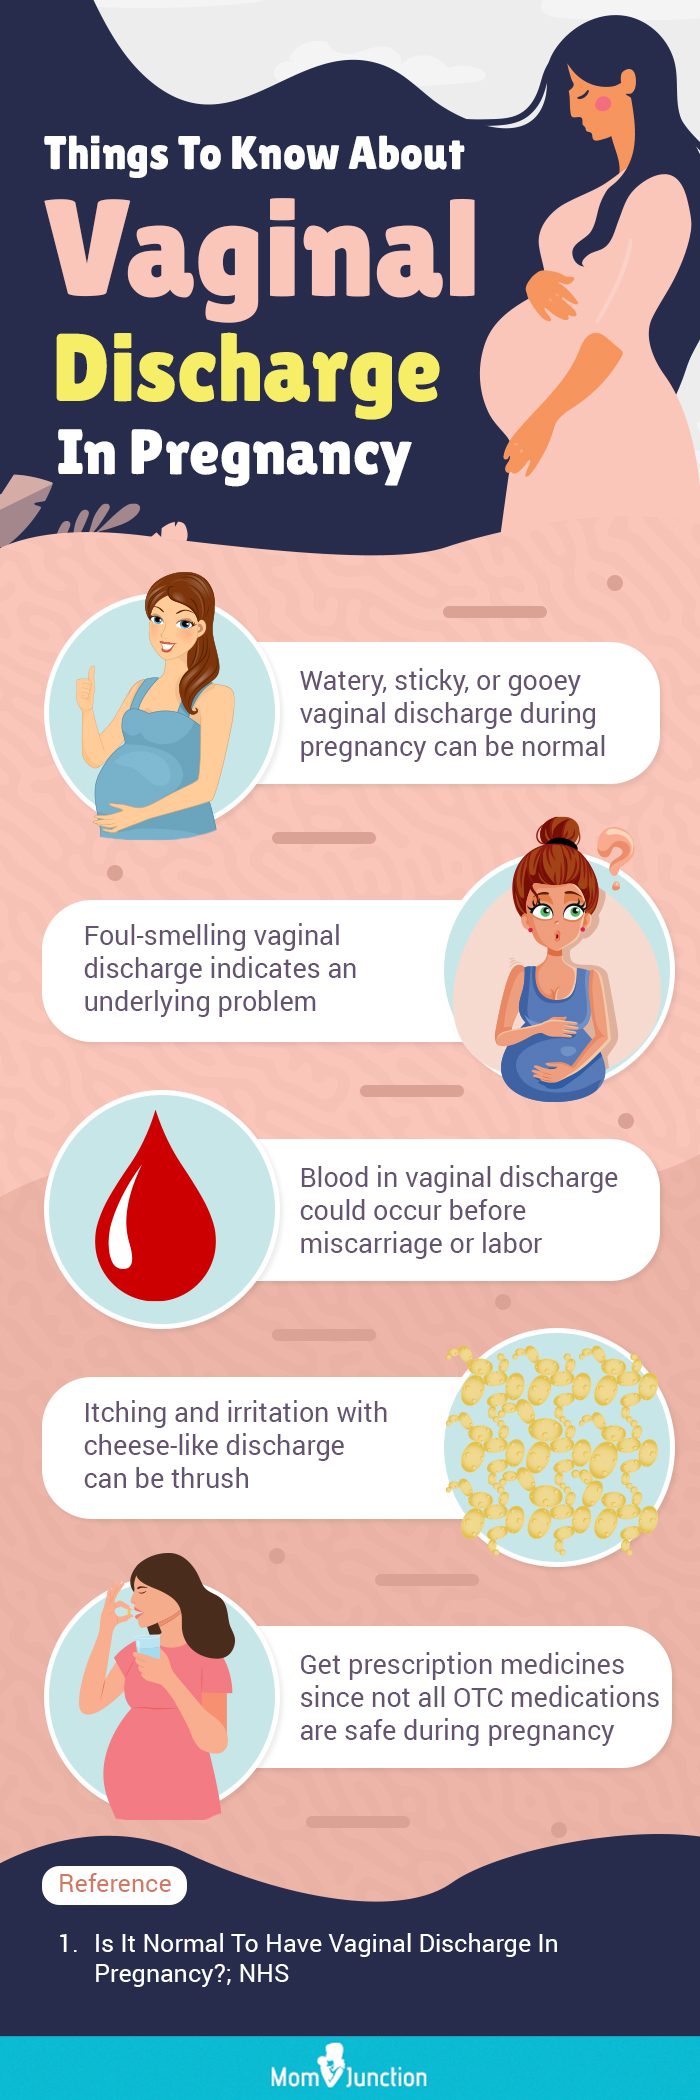 Pregnancy discharge: what vaginal discharge means during pregnancy